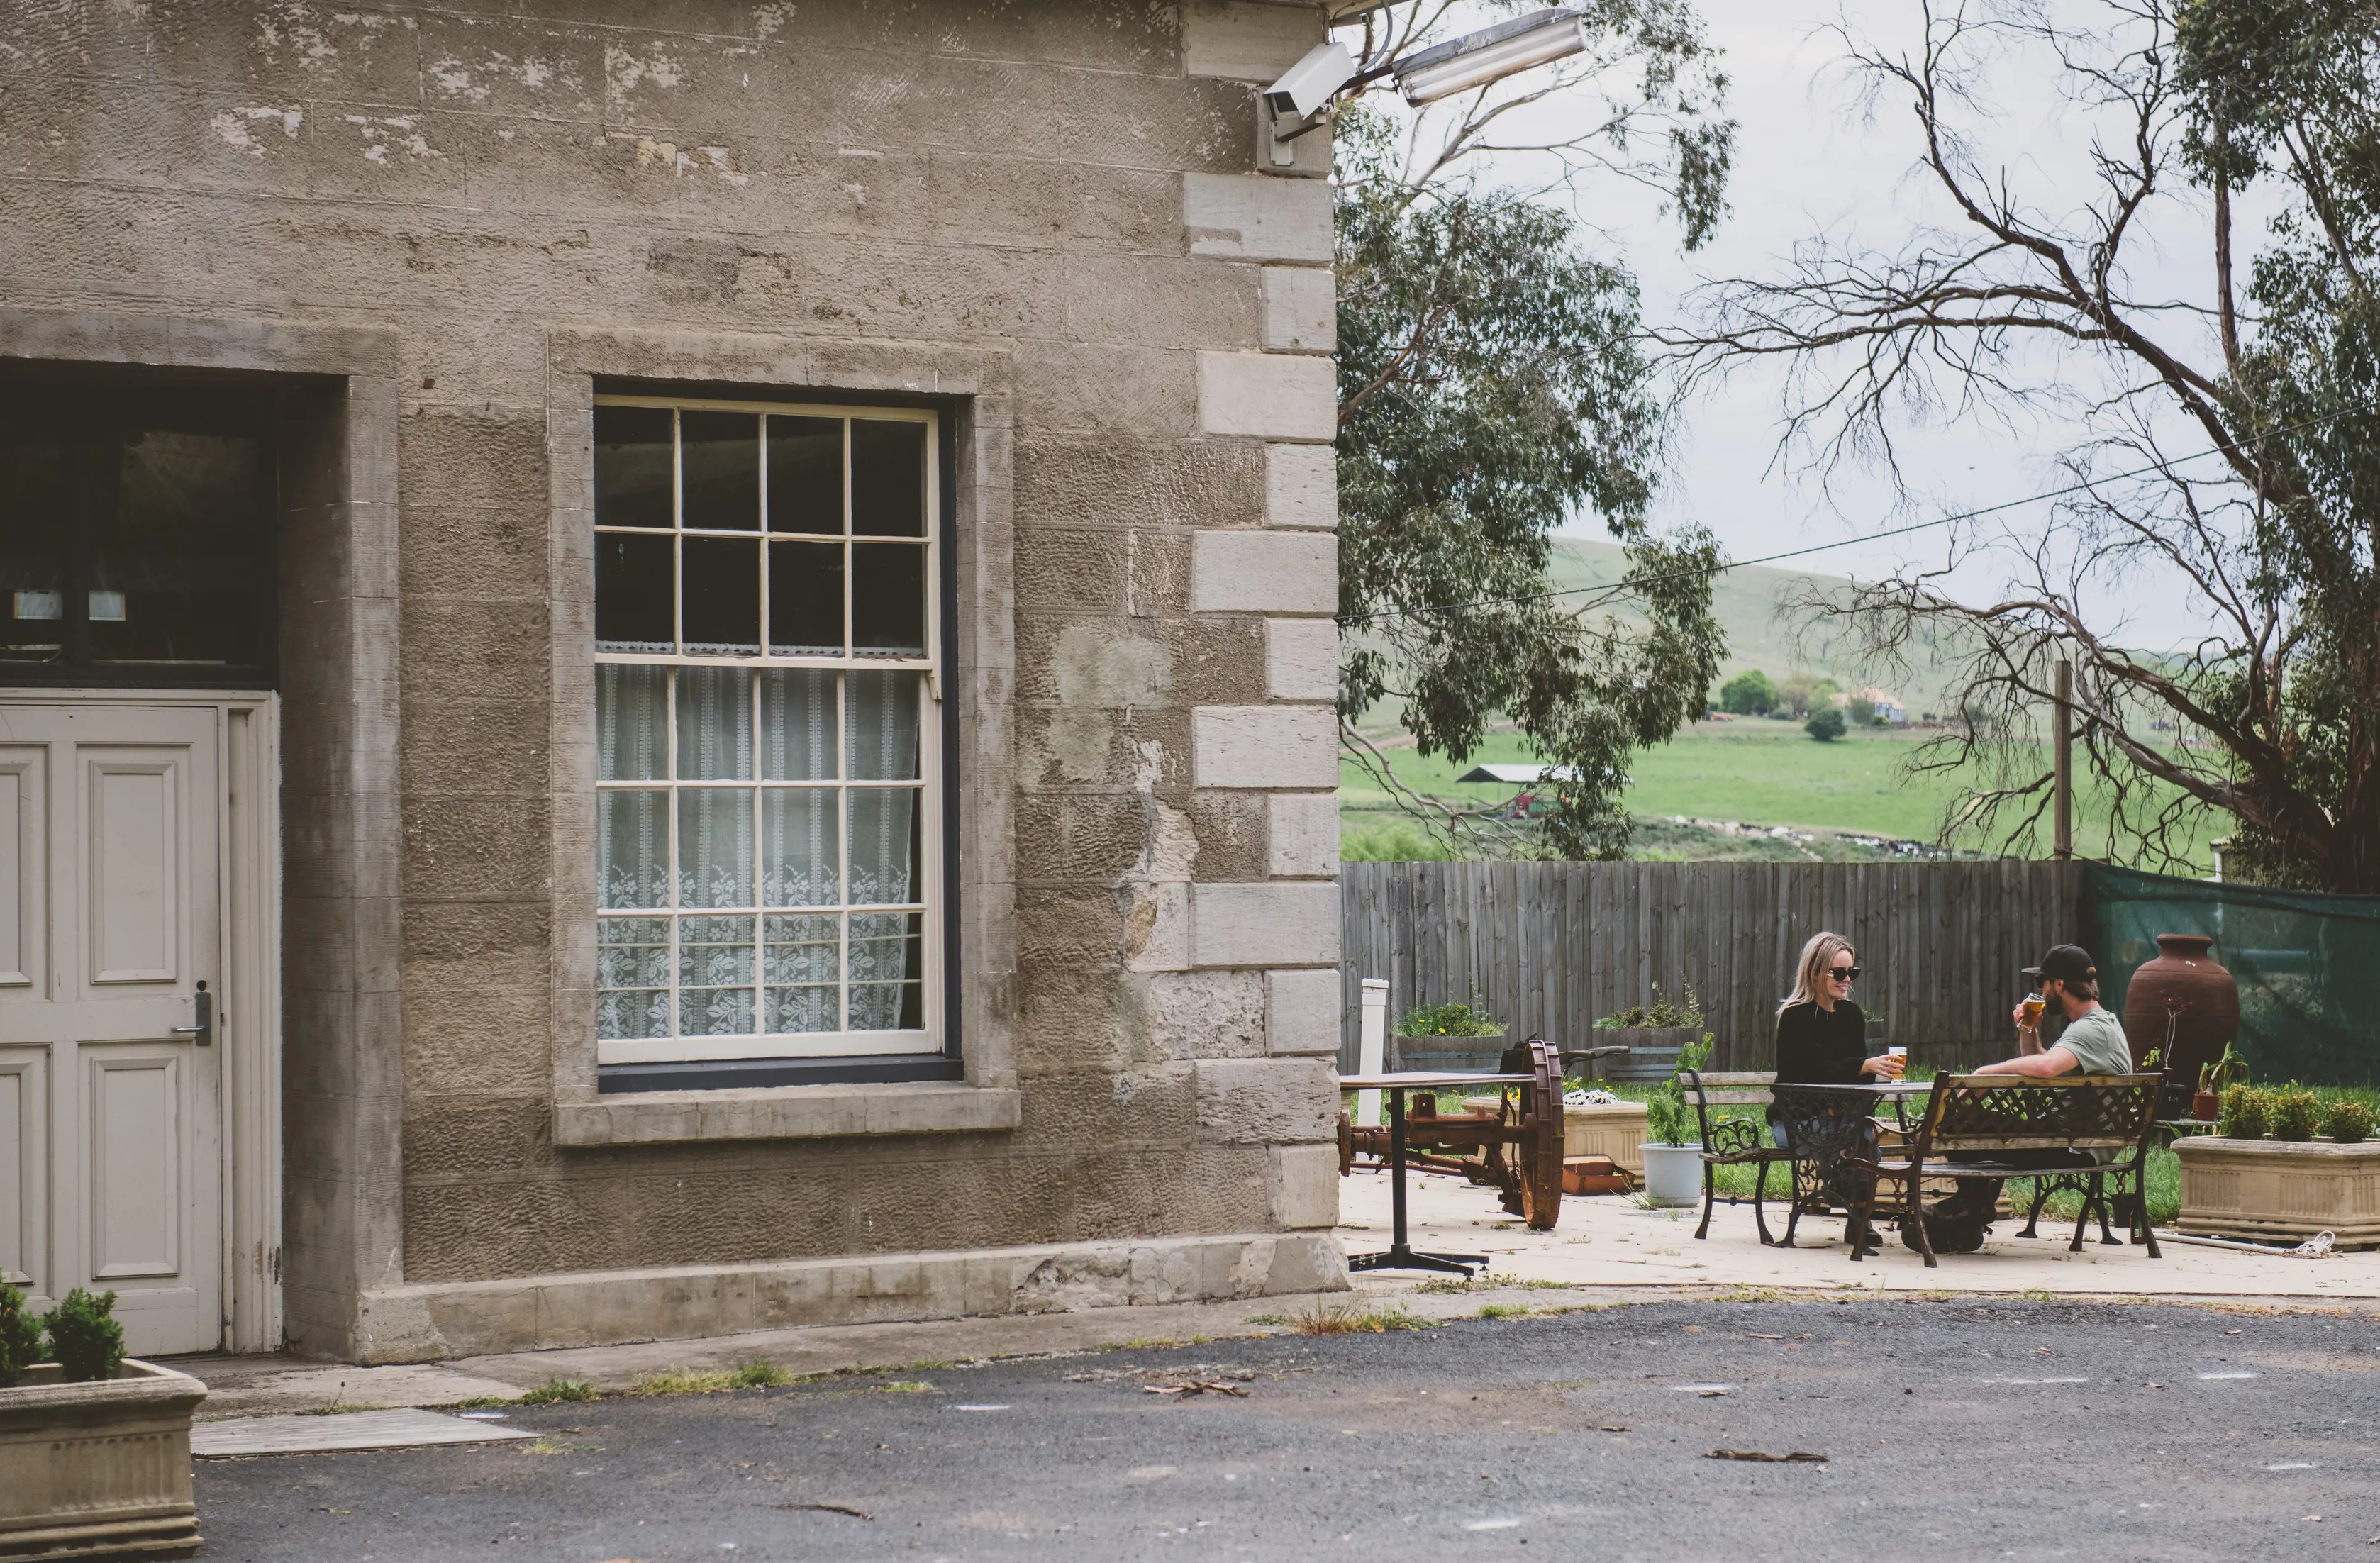 Exterior image of Hamilton Inn, cellar door, cafe & accommodation, convict built in 1826. People enjoy refreshments on a bench outside.